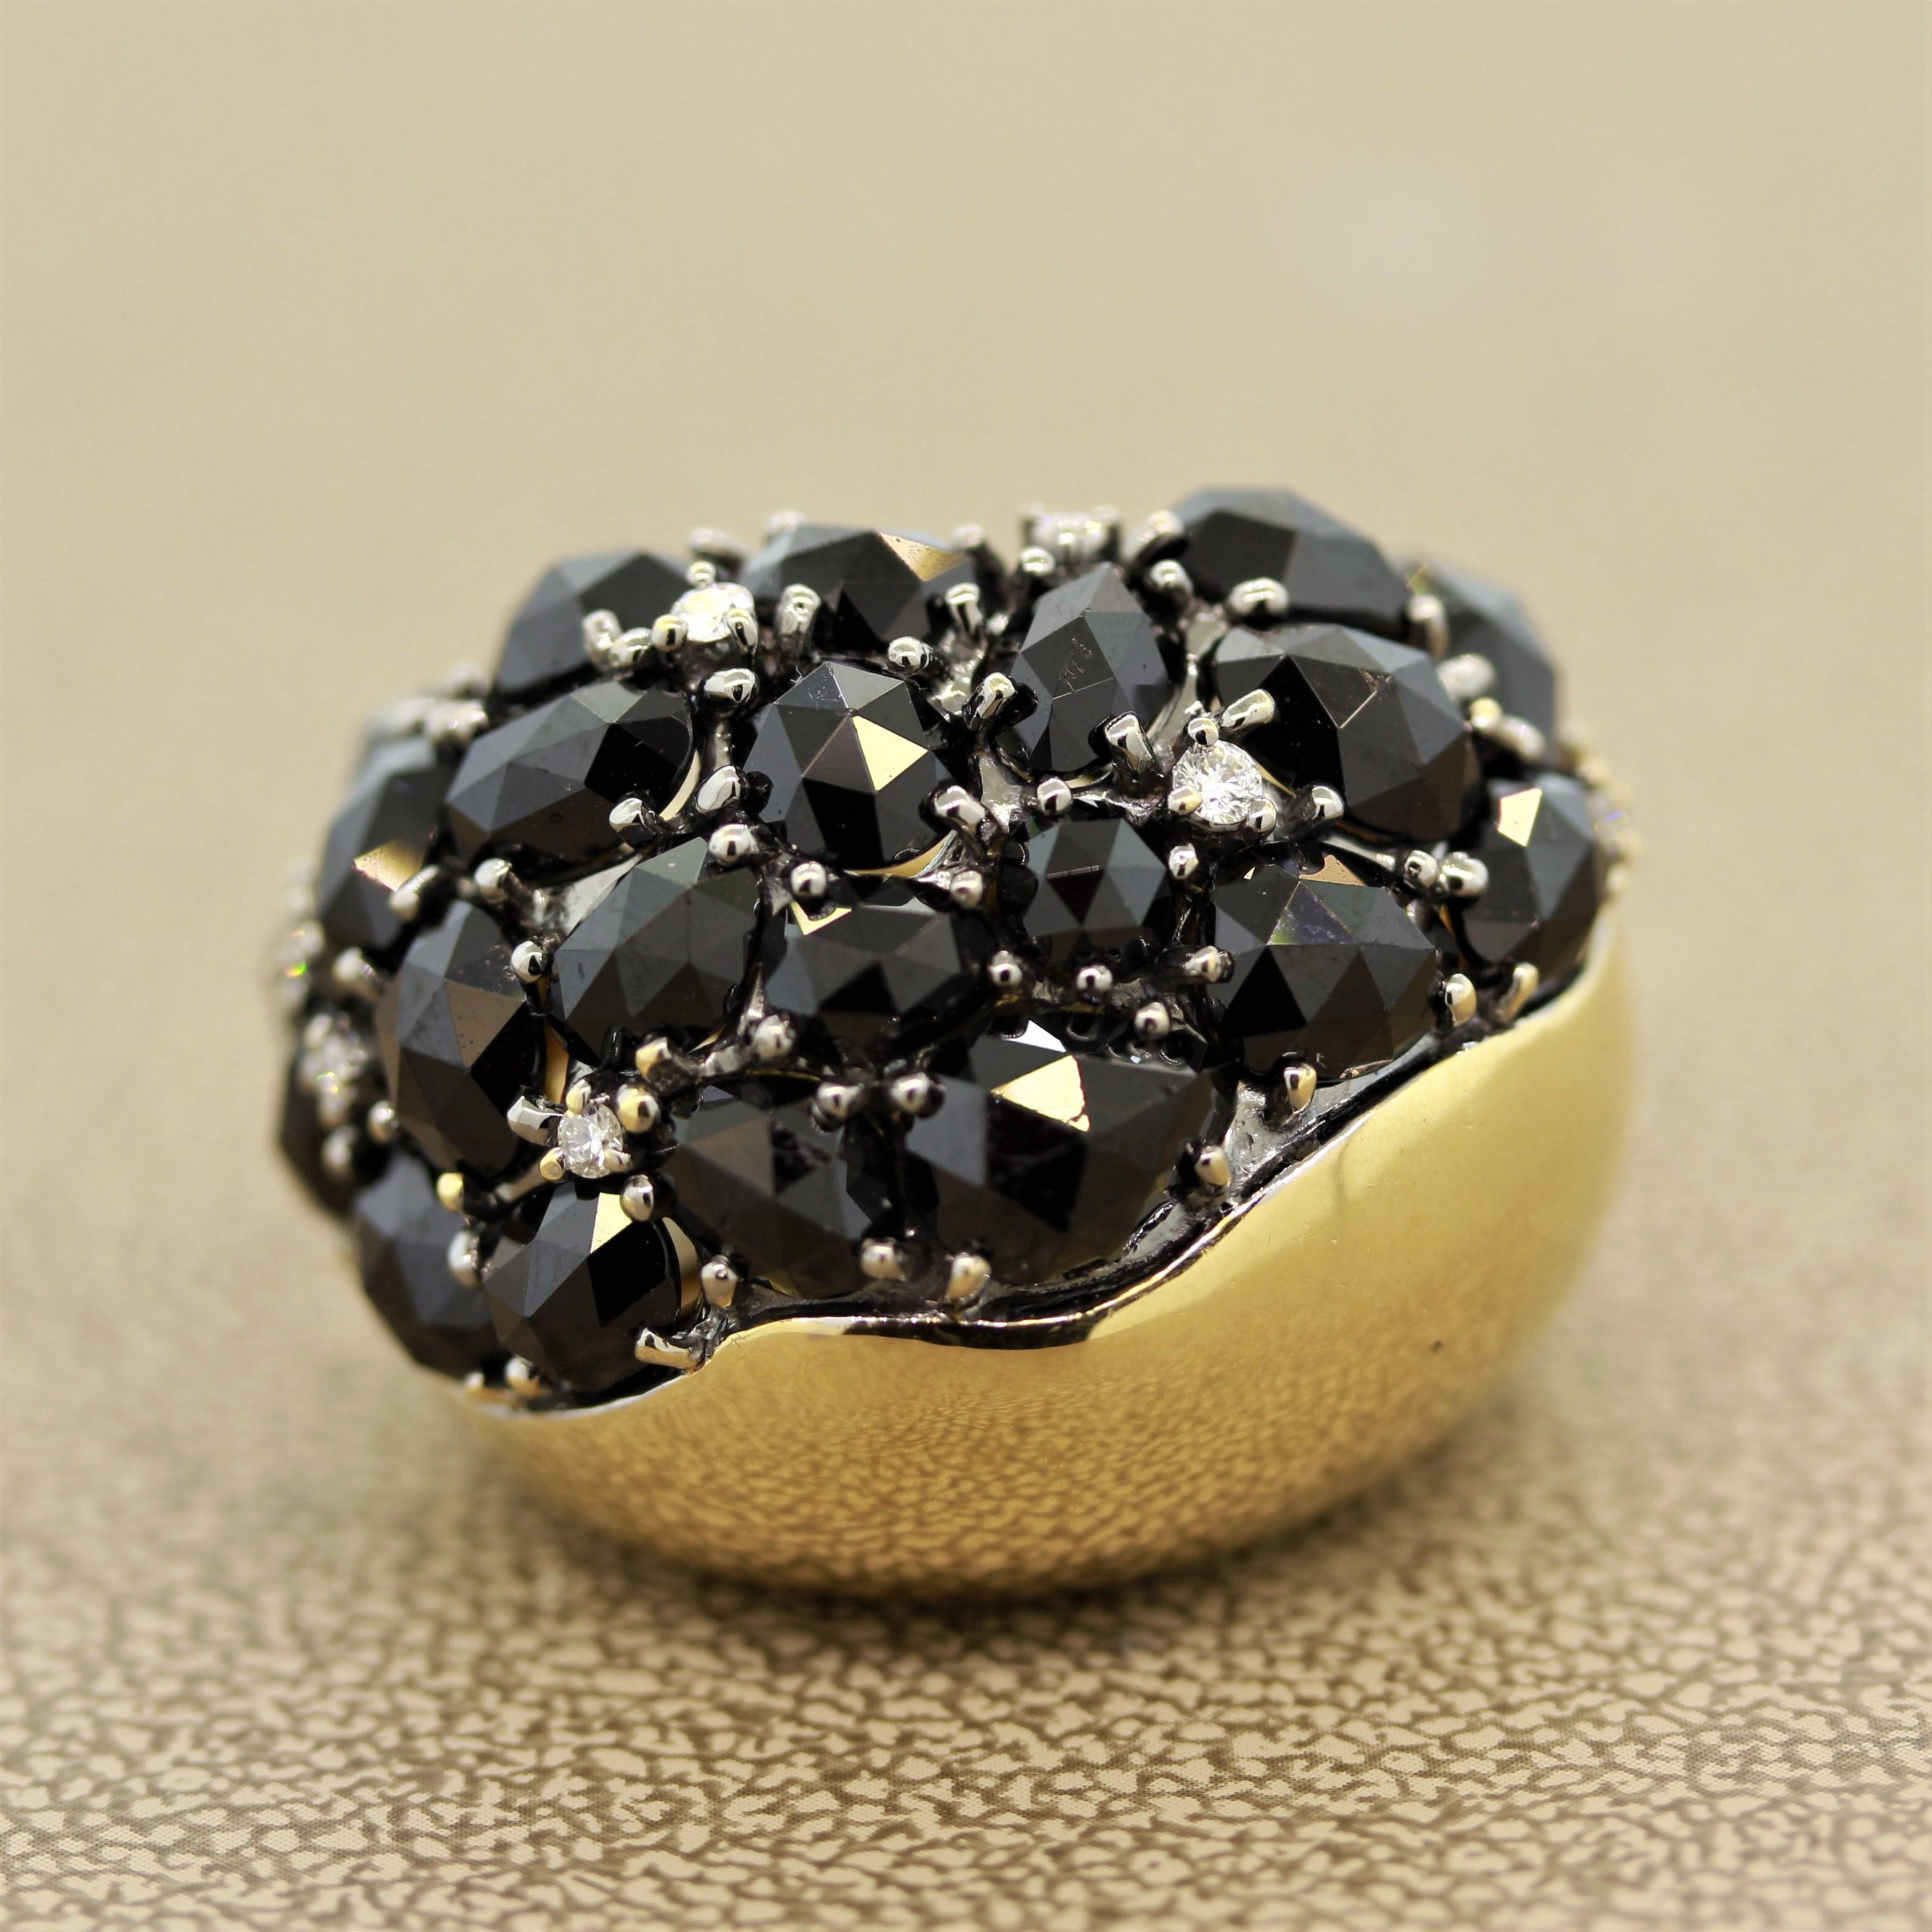 A fine designer ring featuring 11.40 carats of rose cut black spinel are round brilliant cut diamonds. The black spinel and bright white diamonds complement each other with their contrasting colors. Set in 18k yellow gold this cocktail ring will